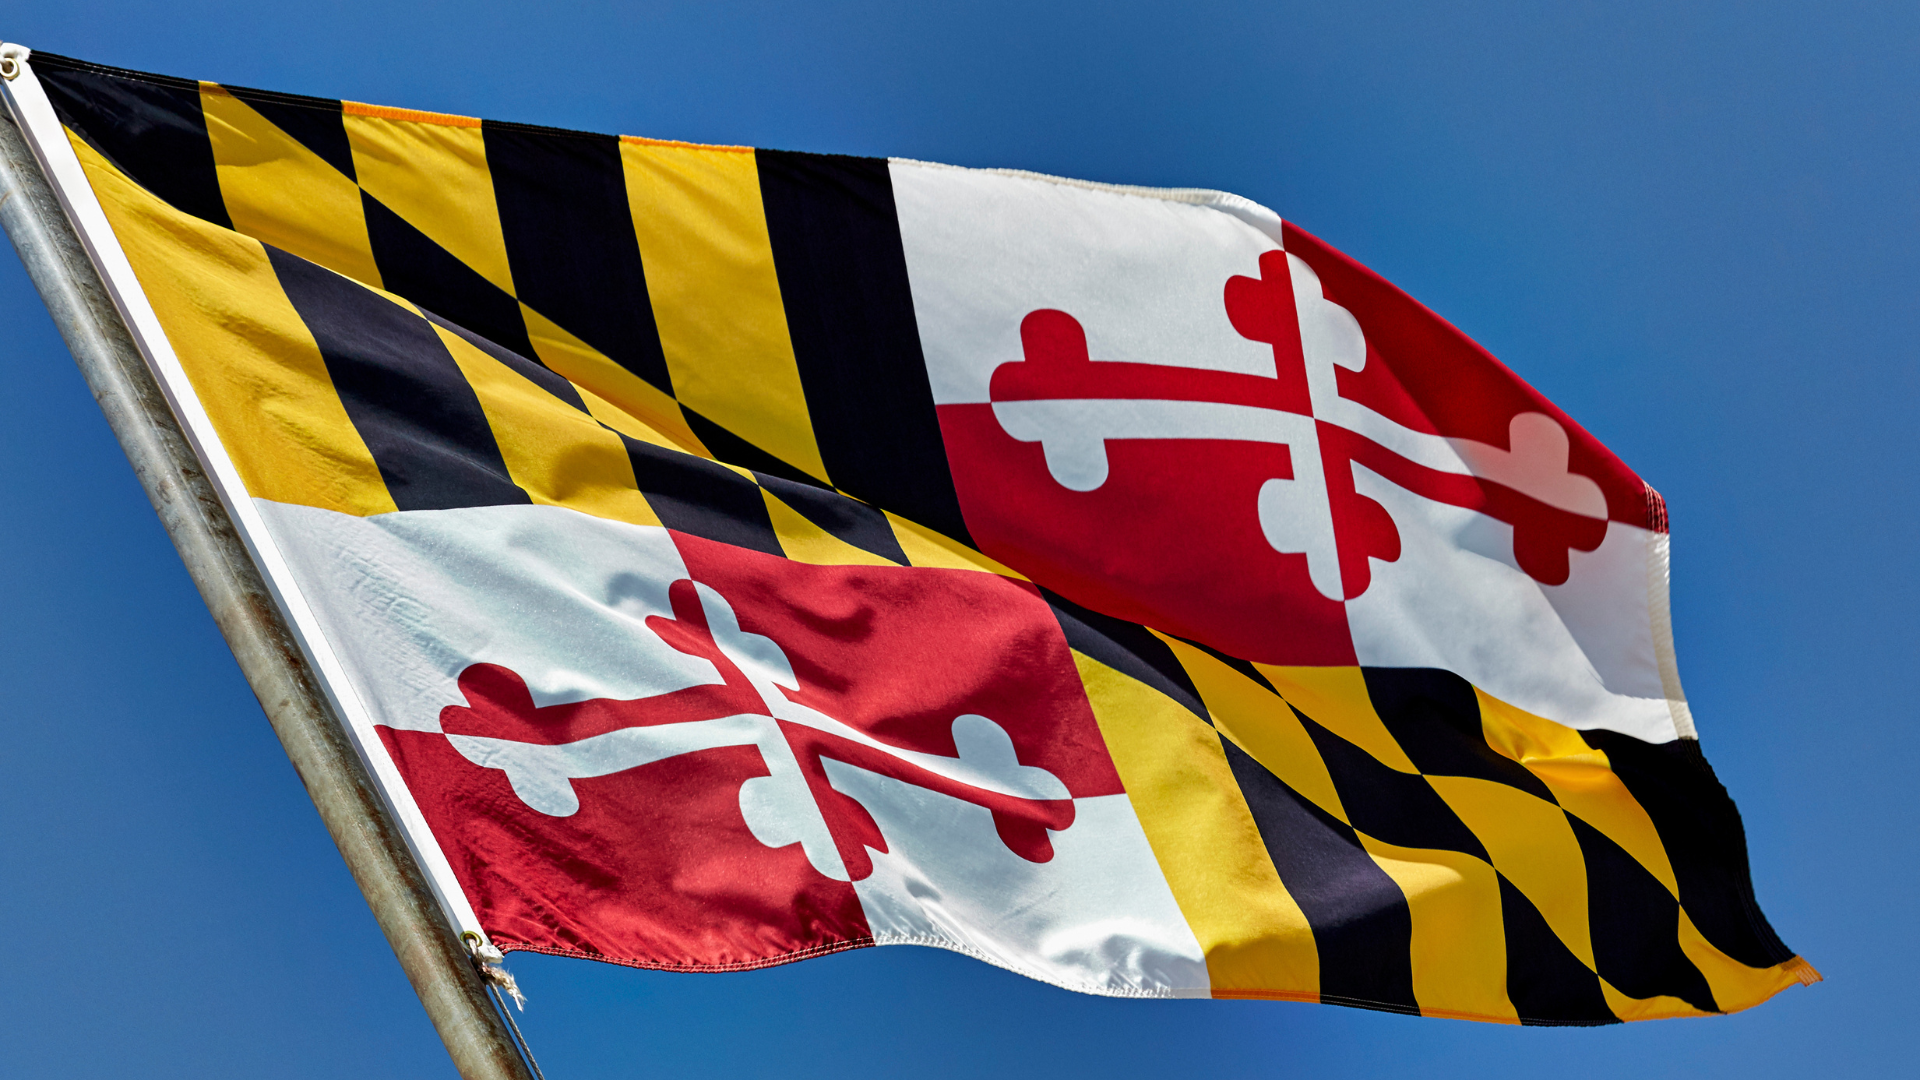 Maryland flag flying in the wind.